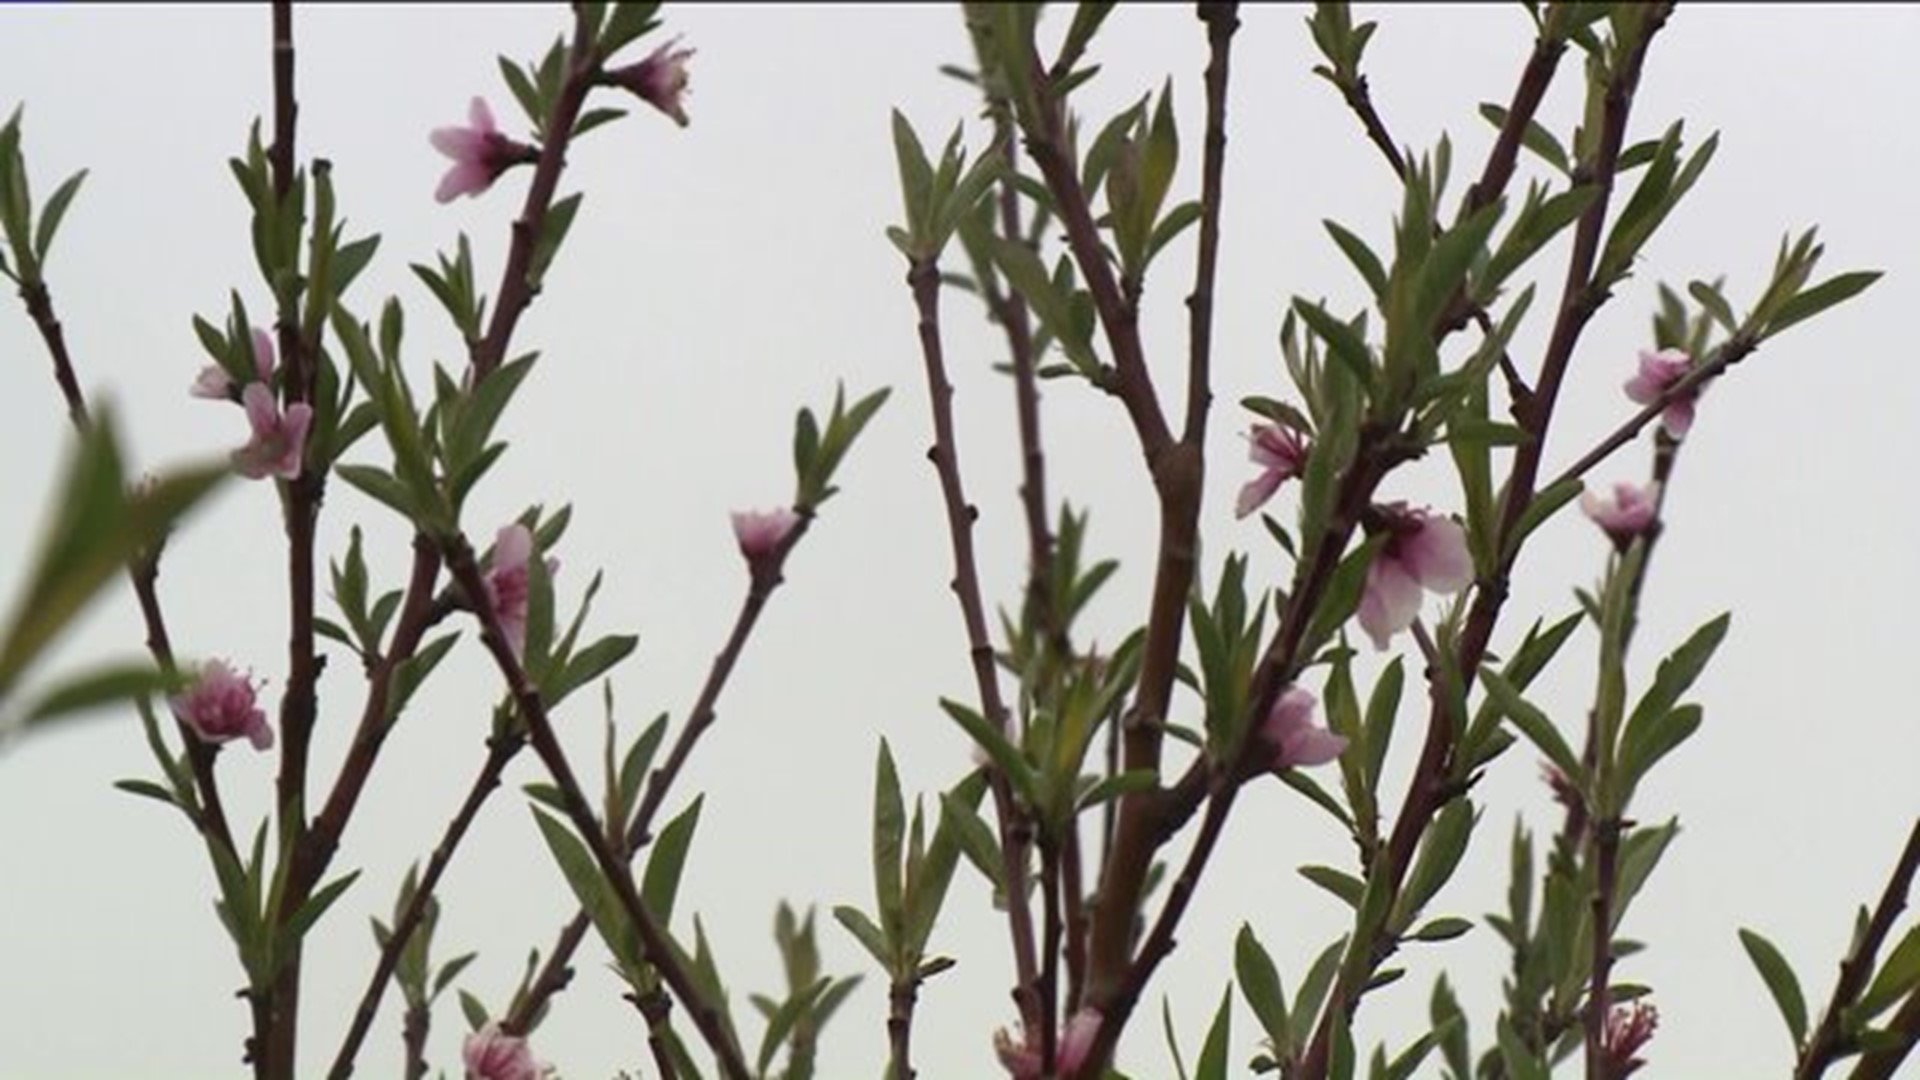 Peaches failing to blossom after tumultuous weather patterns